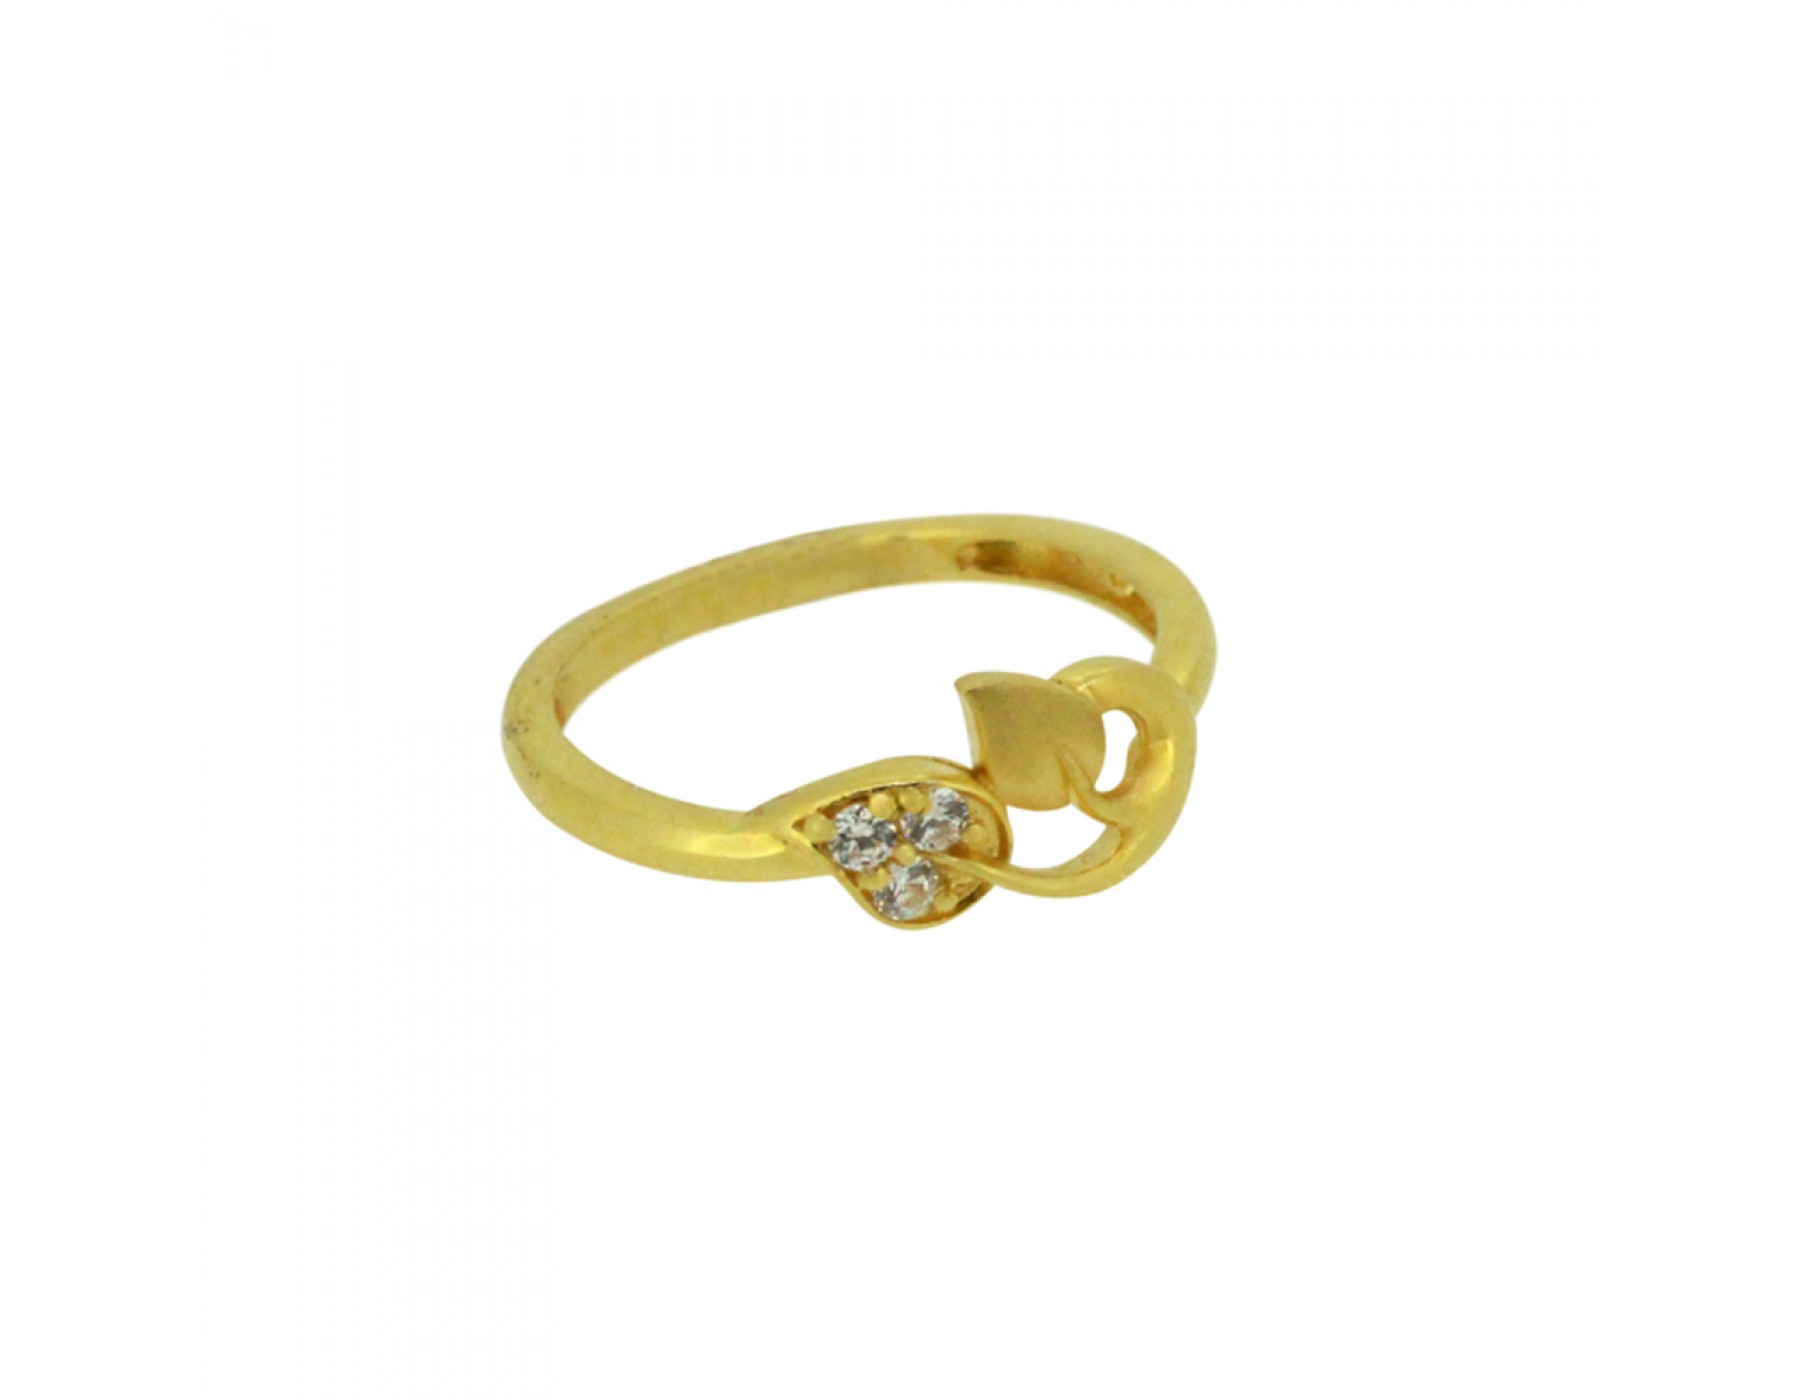 Buy Gold Jewellery Online | Latest Designs at Best Price